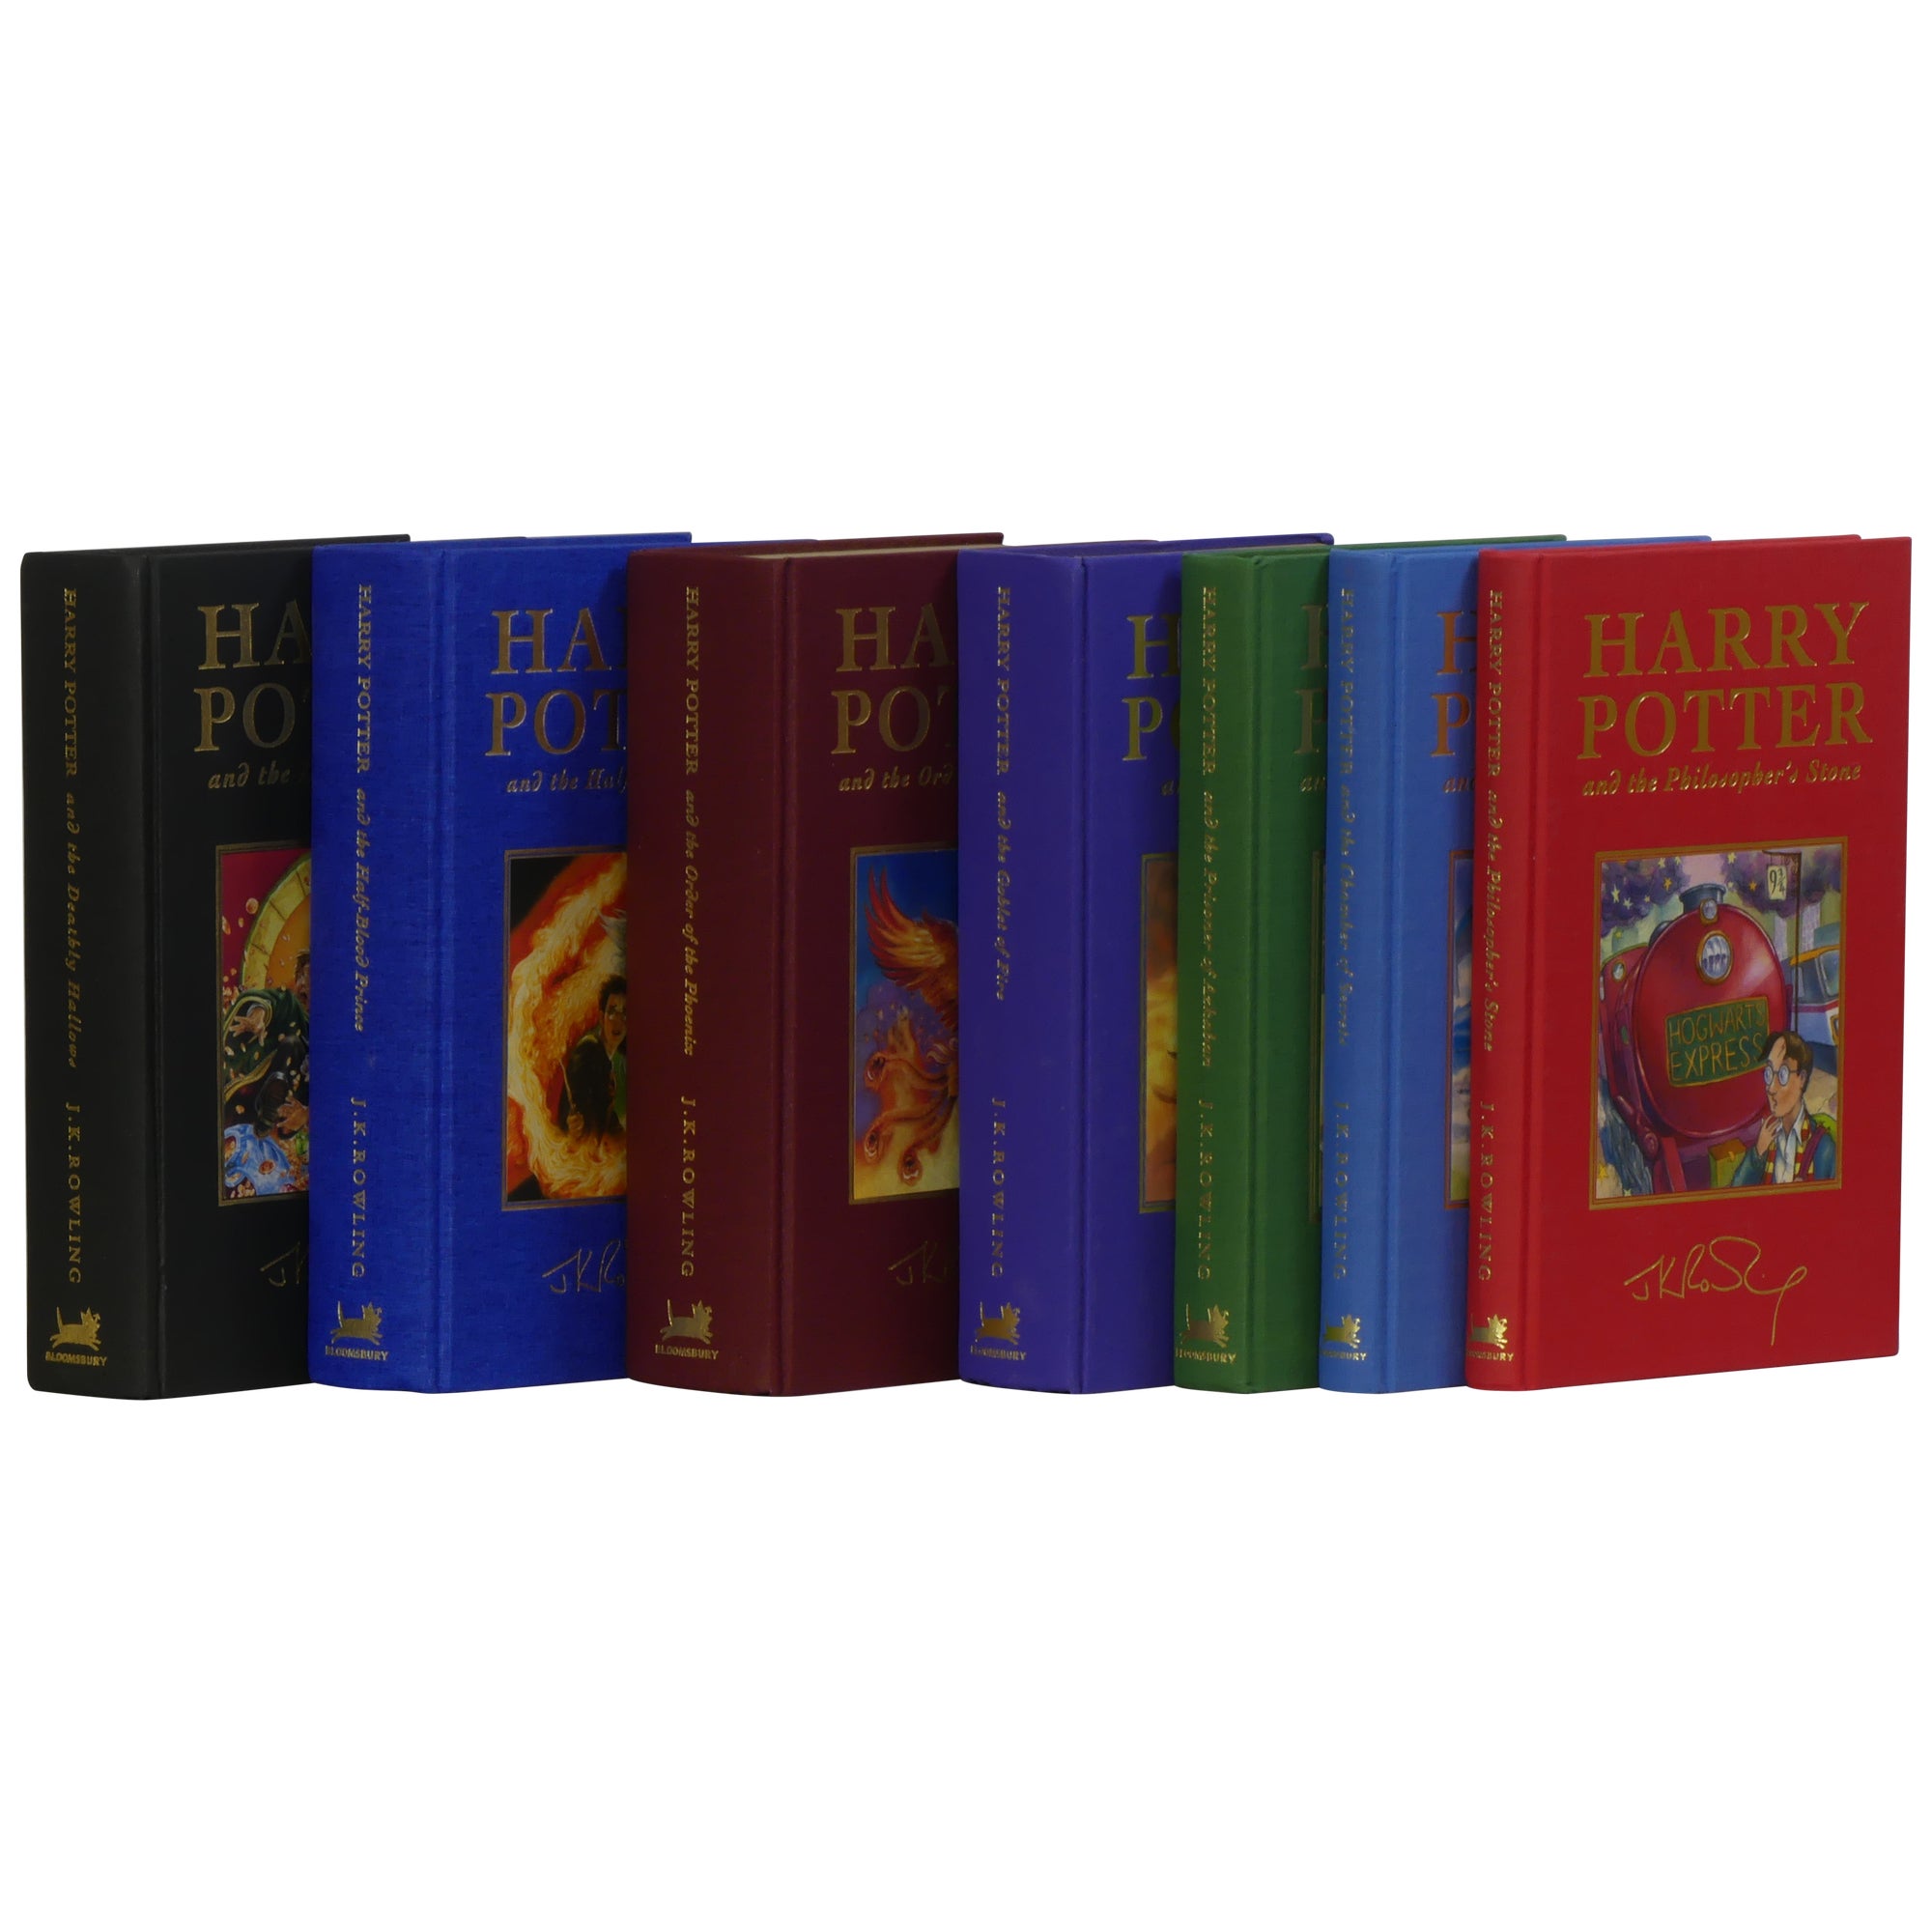 HARRY POTTER BOOKS, SET OF SEVEN, HARD COVER, EXCELLENT, FIRST EDITION